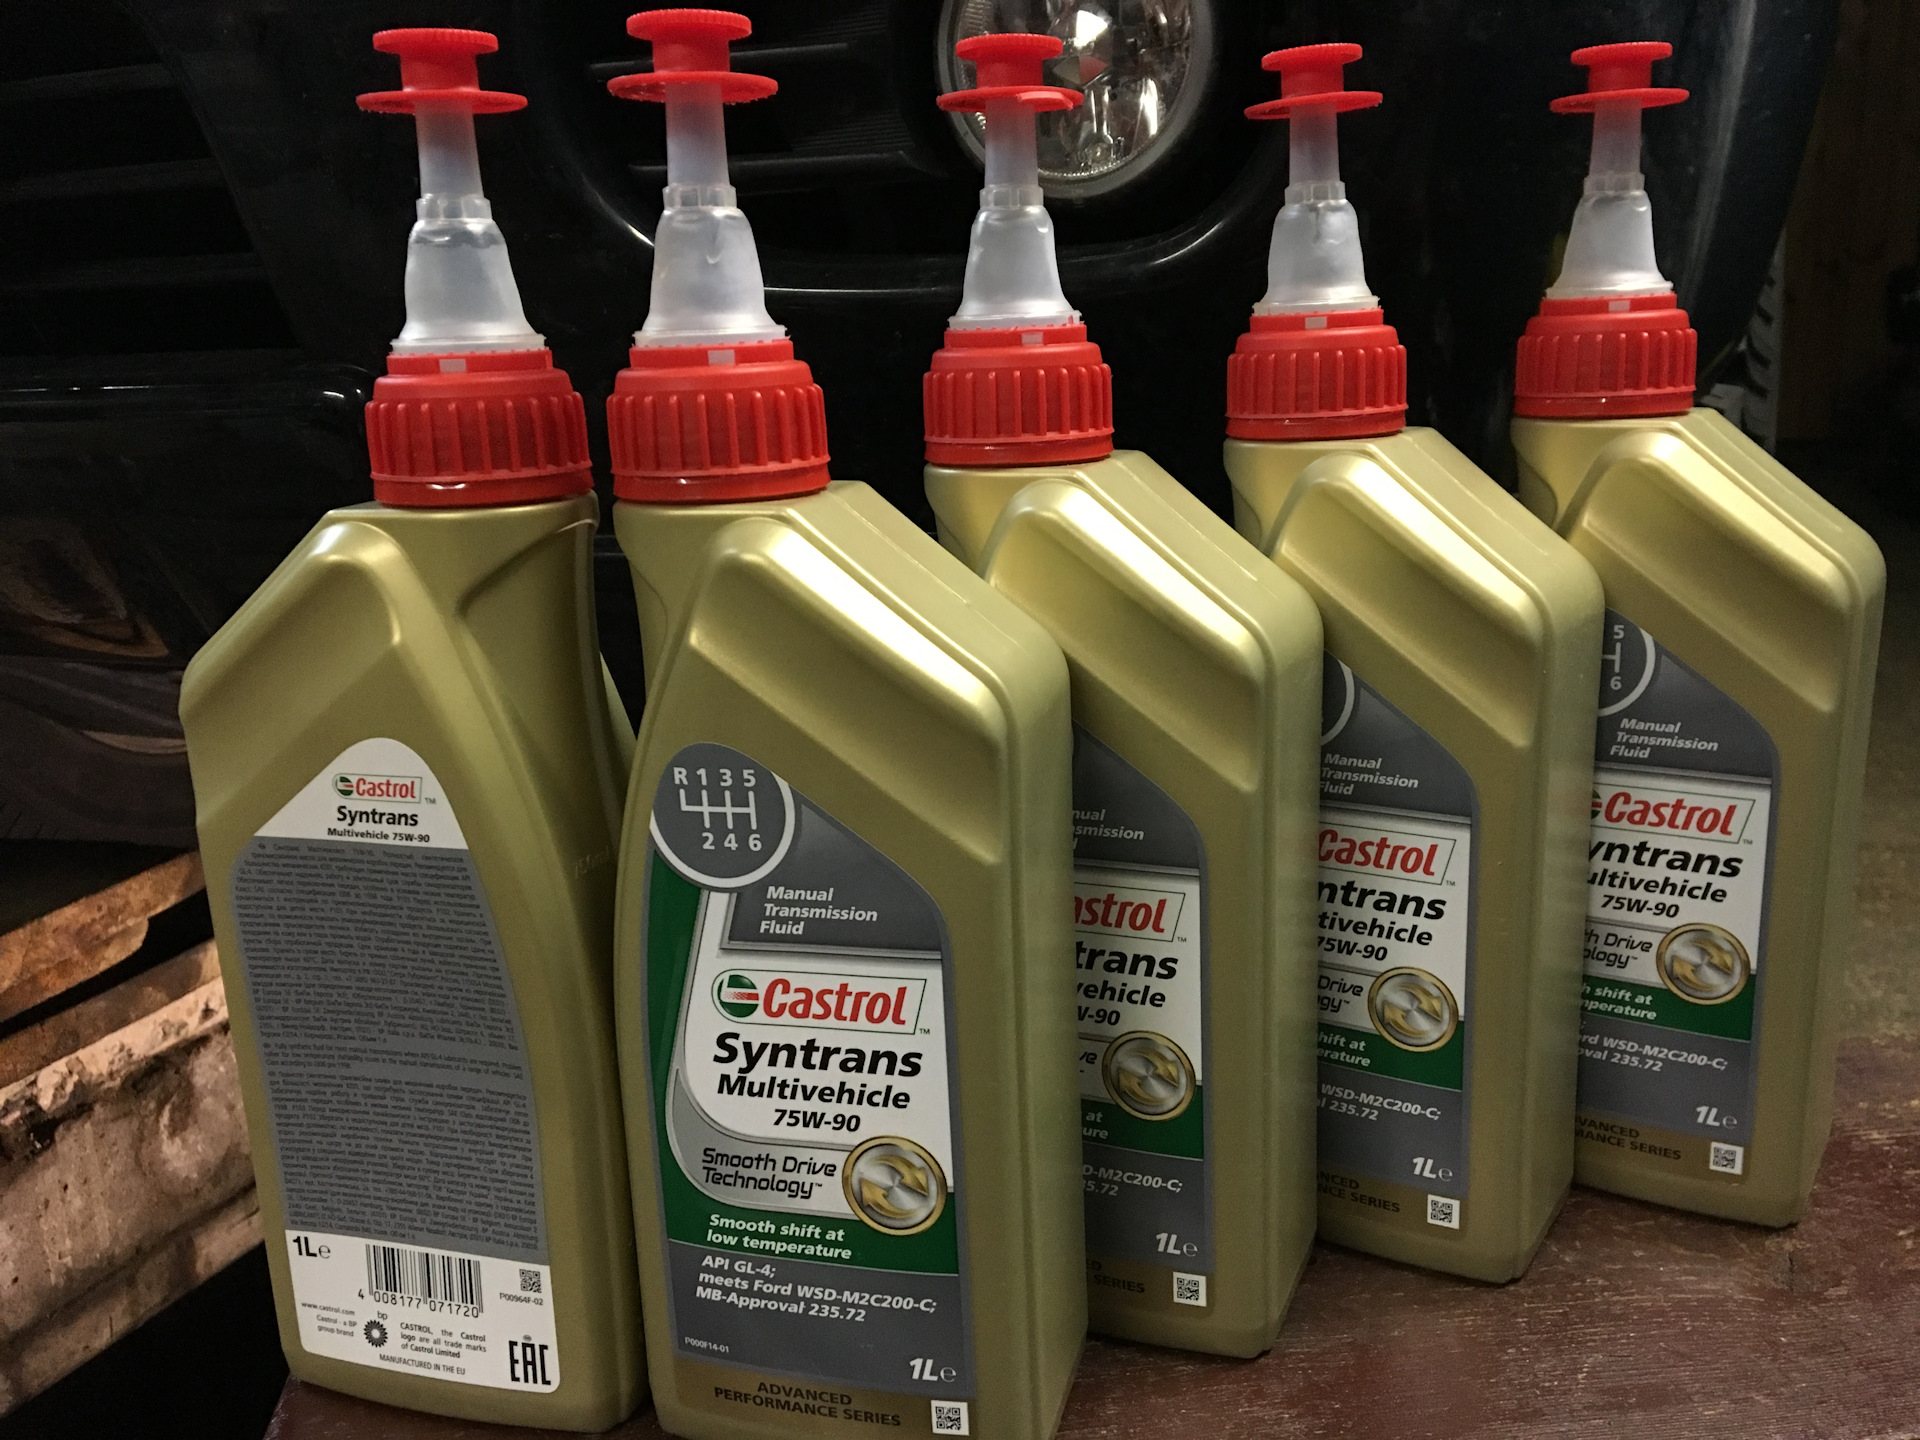 Гл 5 масло. Castrol Syntrans Multivehicle, 75w-90 Форд. 75w90 gl4 Castrol Syntrans. Castrol Syntrans Multivehicle 75w-90 gl-4. Масло Castrol 75w90 gl4 Multivehicle.